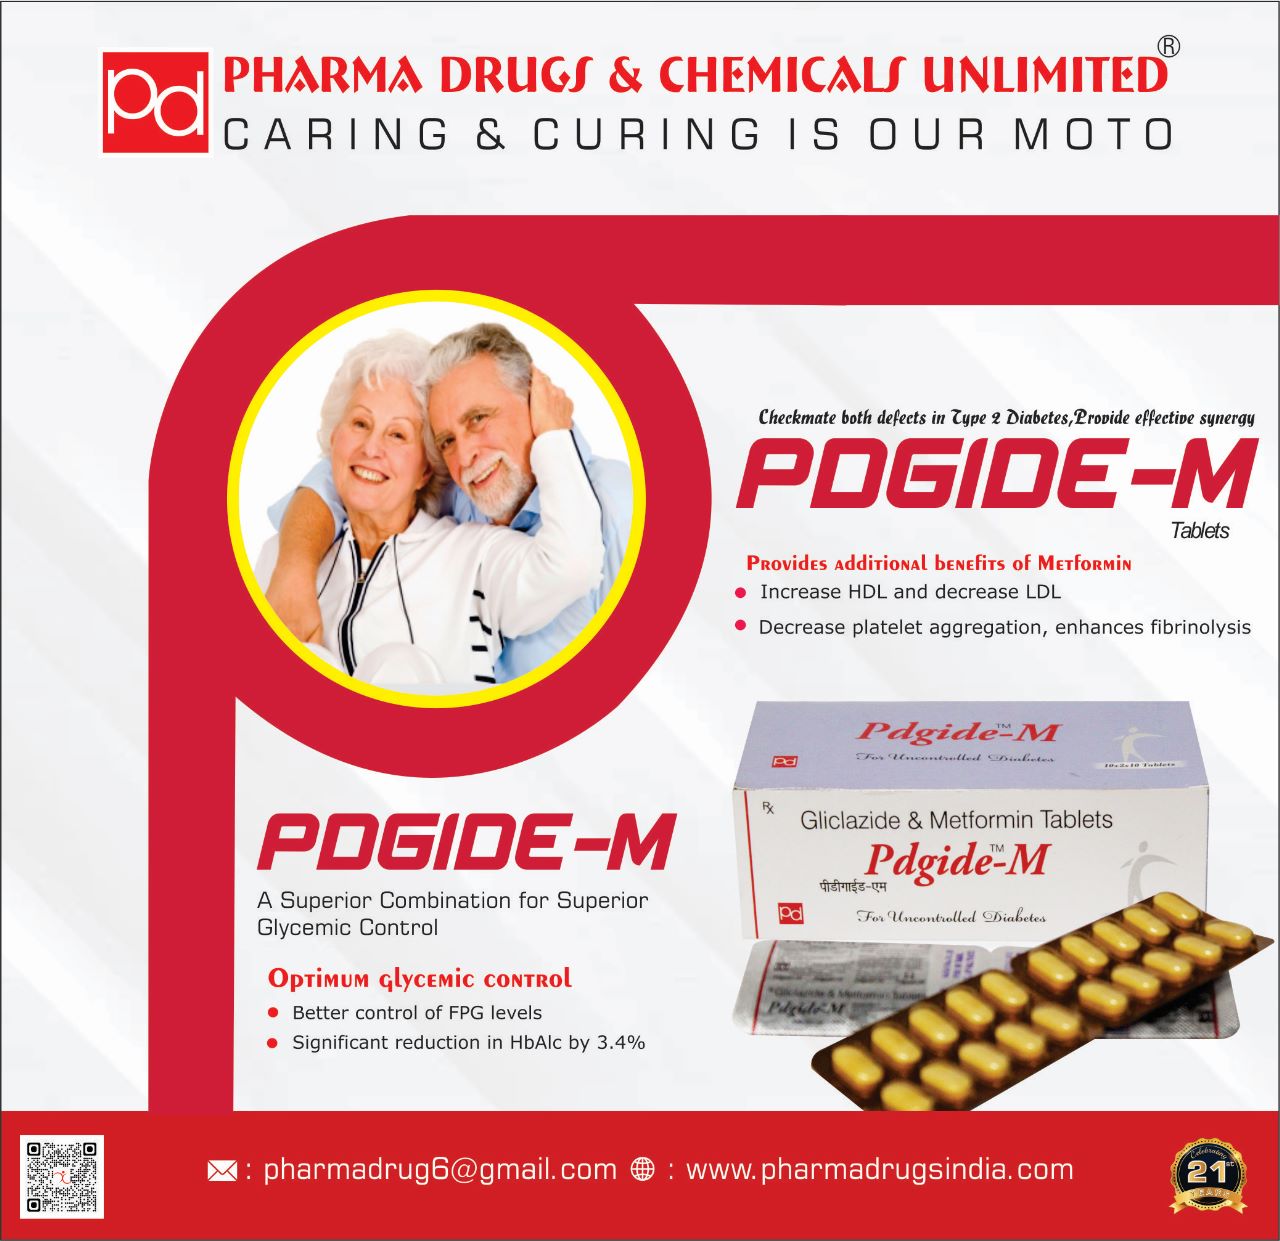 Product Name: Pdgide M, Compositions of are Gliclazide & Metfortin Tablets - Pharma Drugs and Chemicals